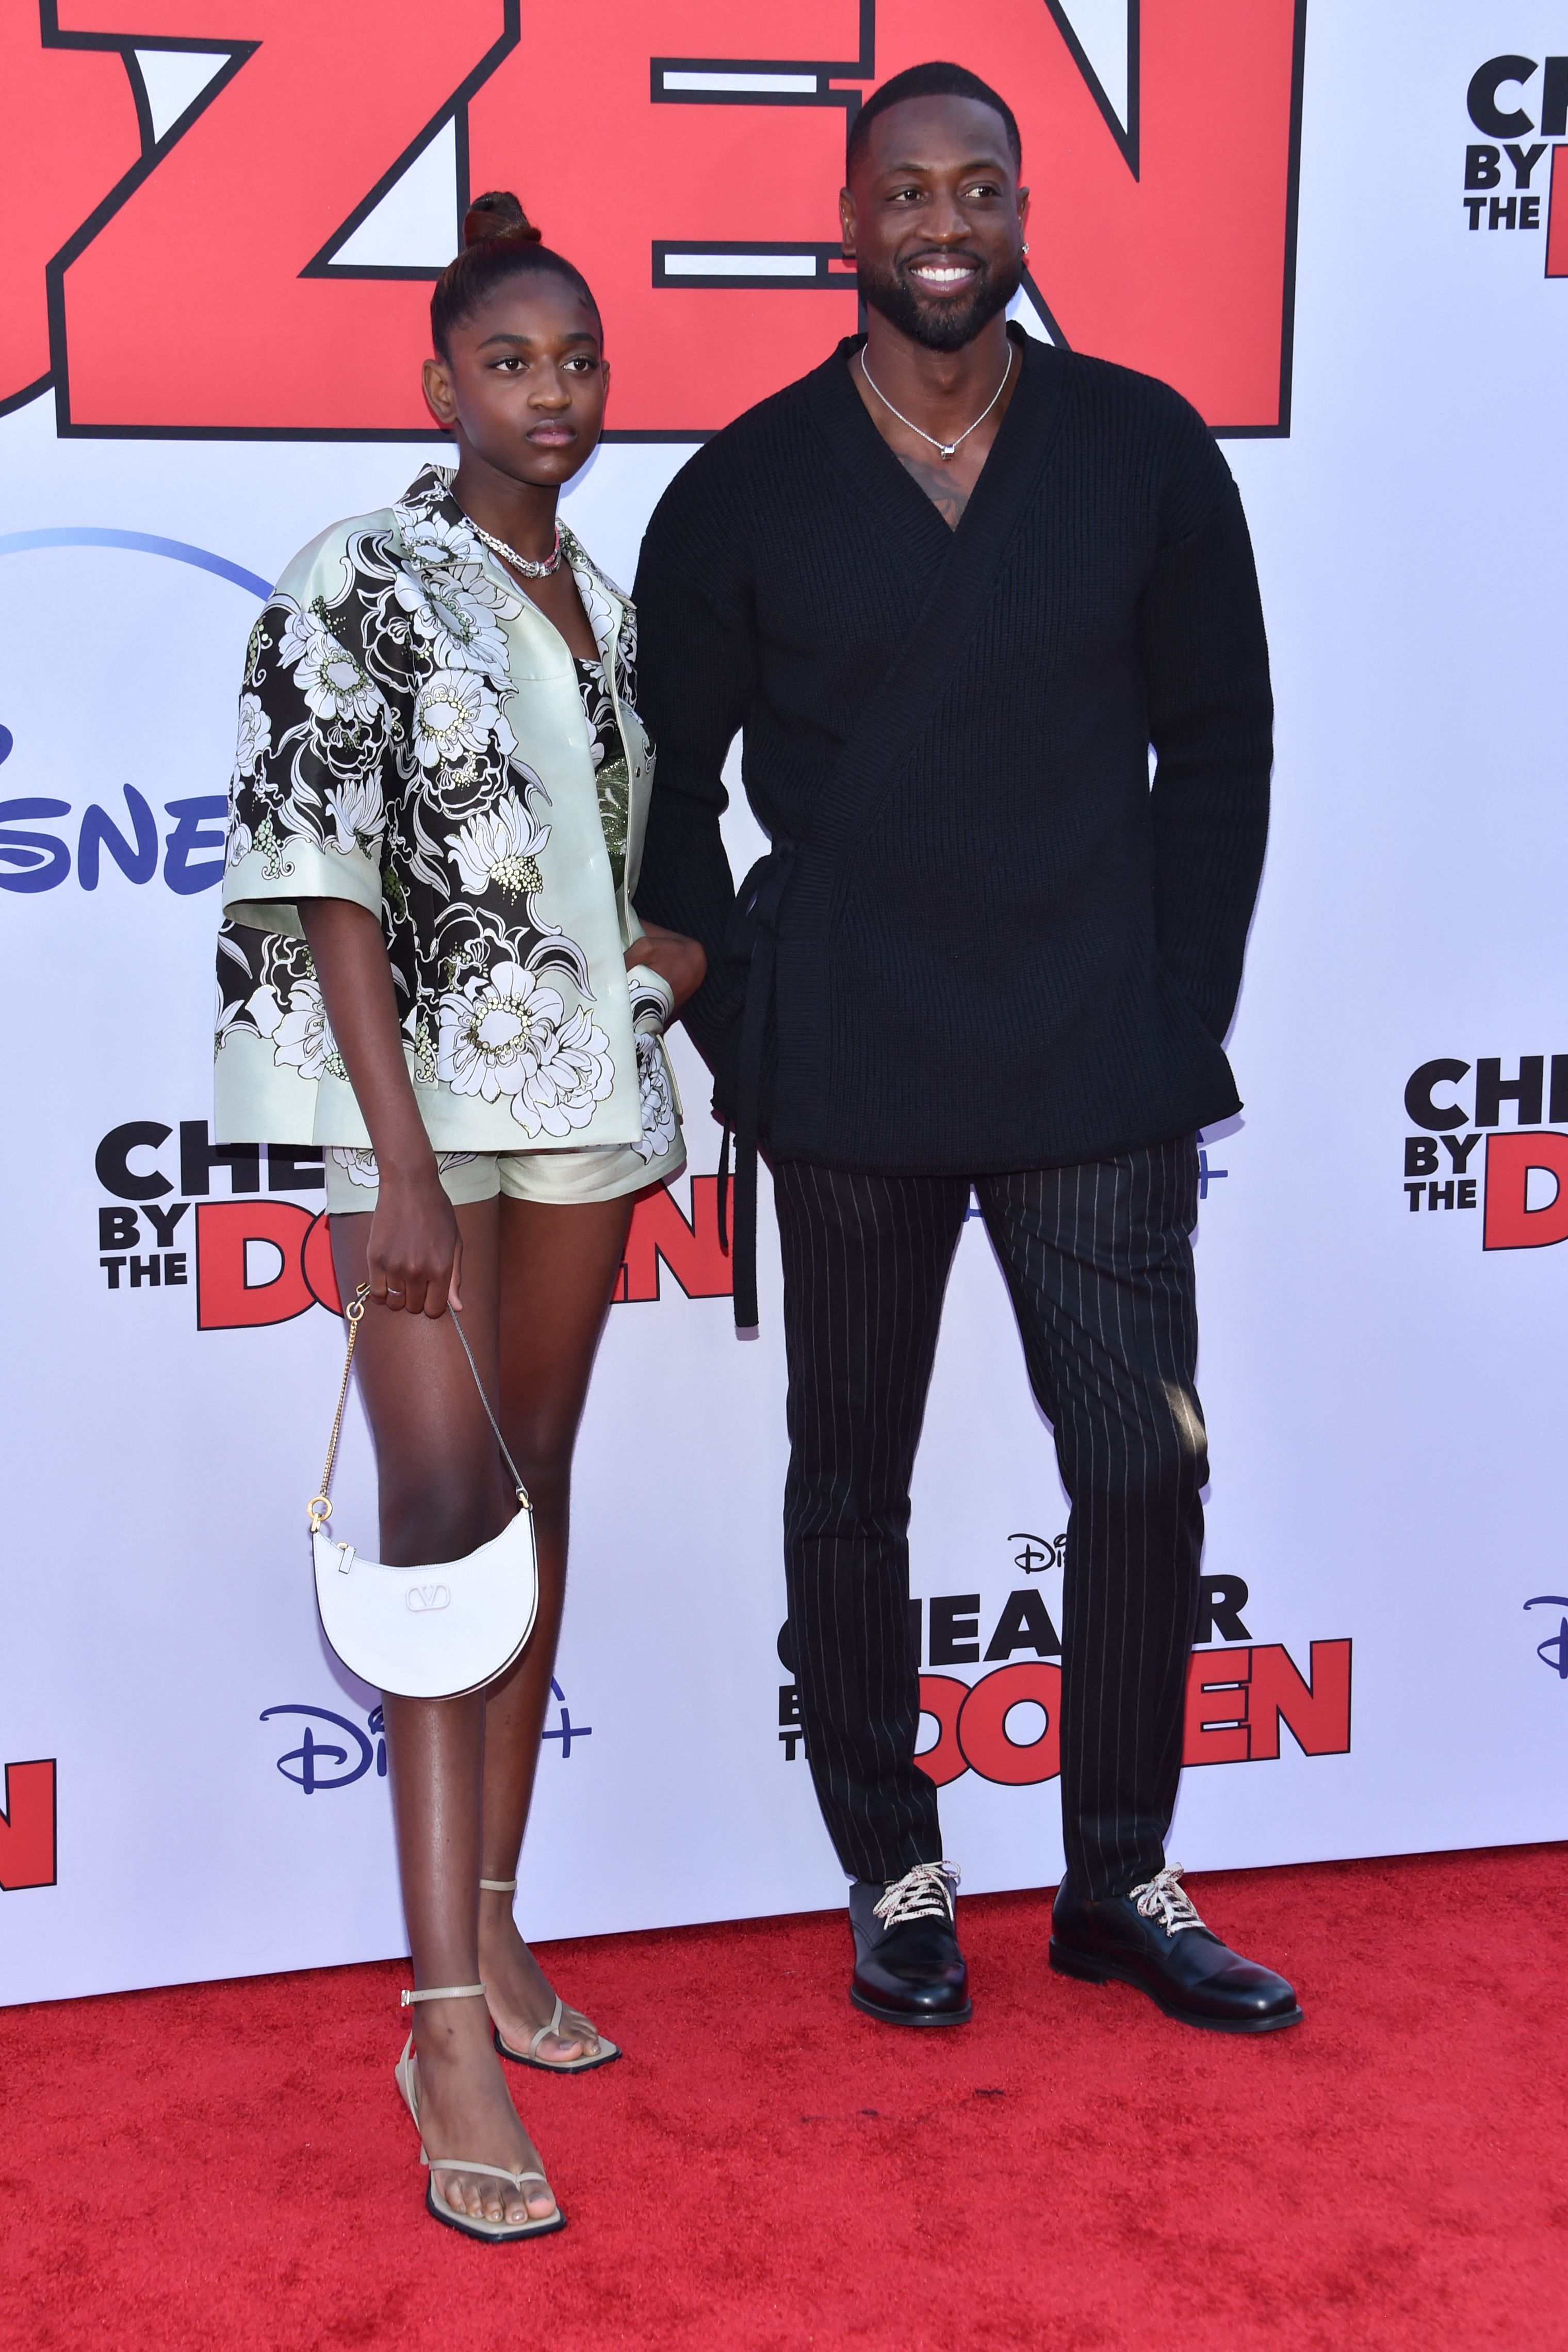 Zaya and Dwyane Wade at the Disney premiere of "Cheaper by the Dozen" in Hollywood, California on March 16, 2022 | Source: Getty Images